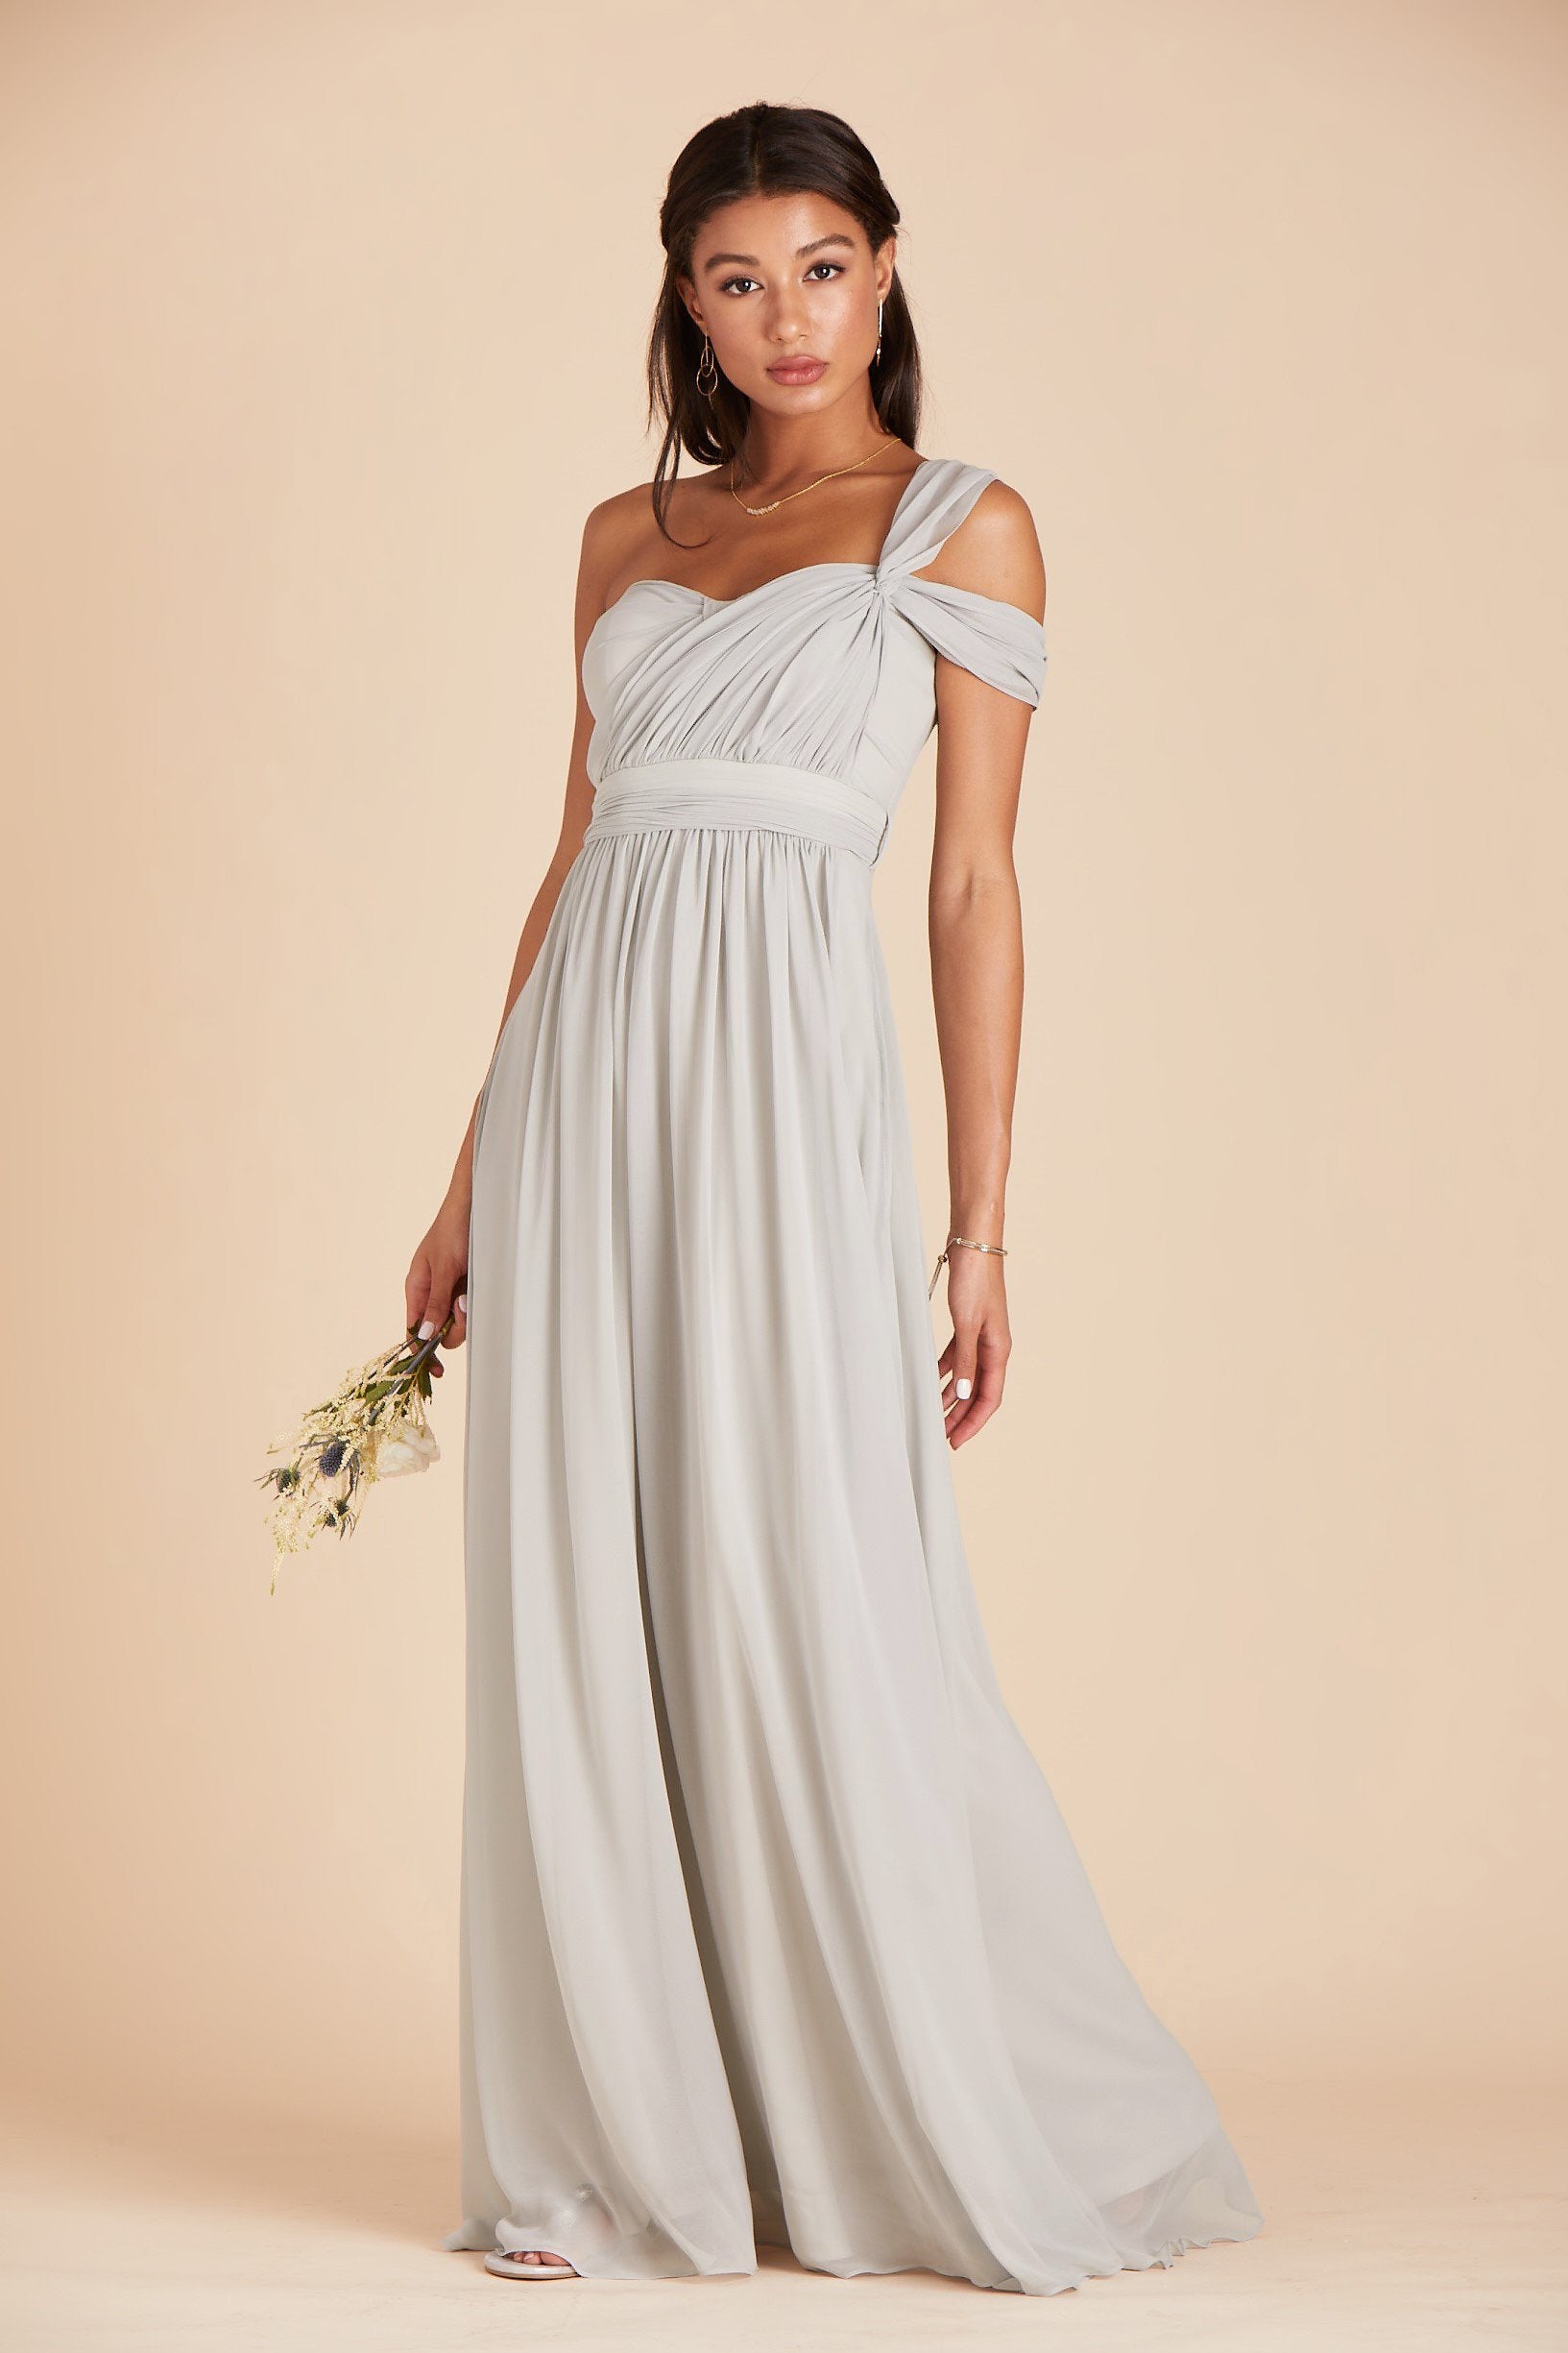 Grace convertible bridesmaid dress in dove gray chiffon by Birdy Grey, front view